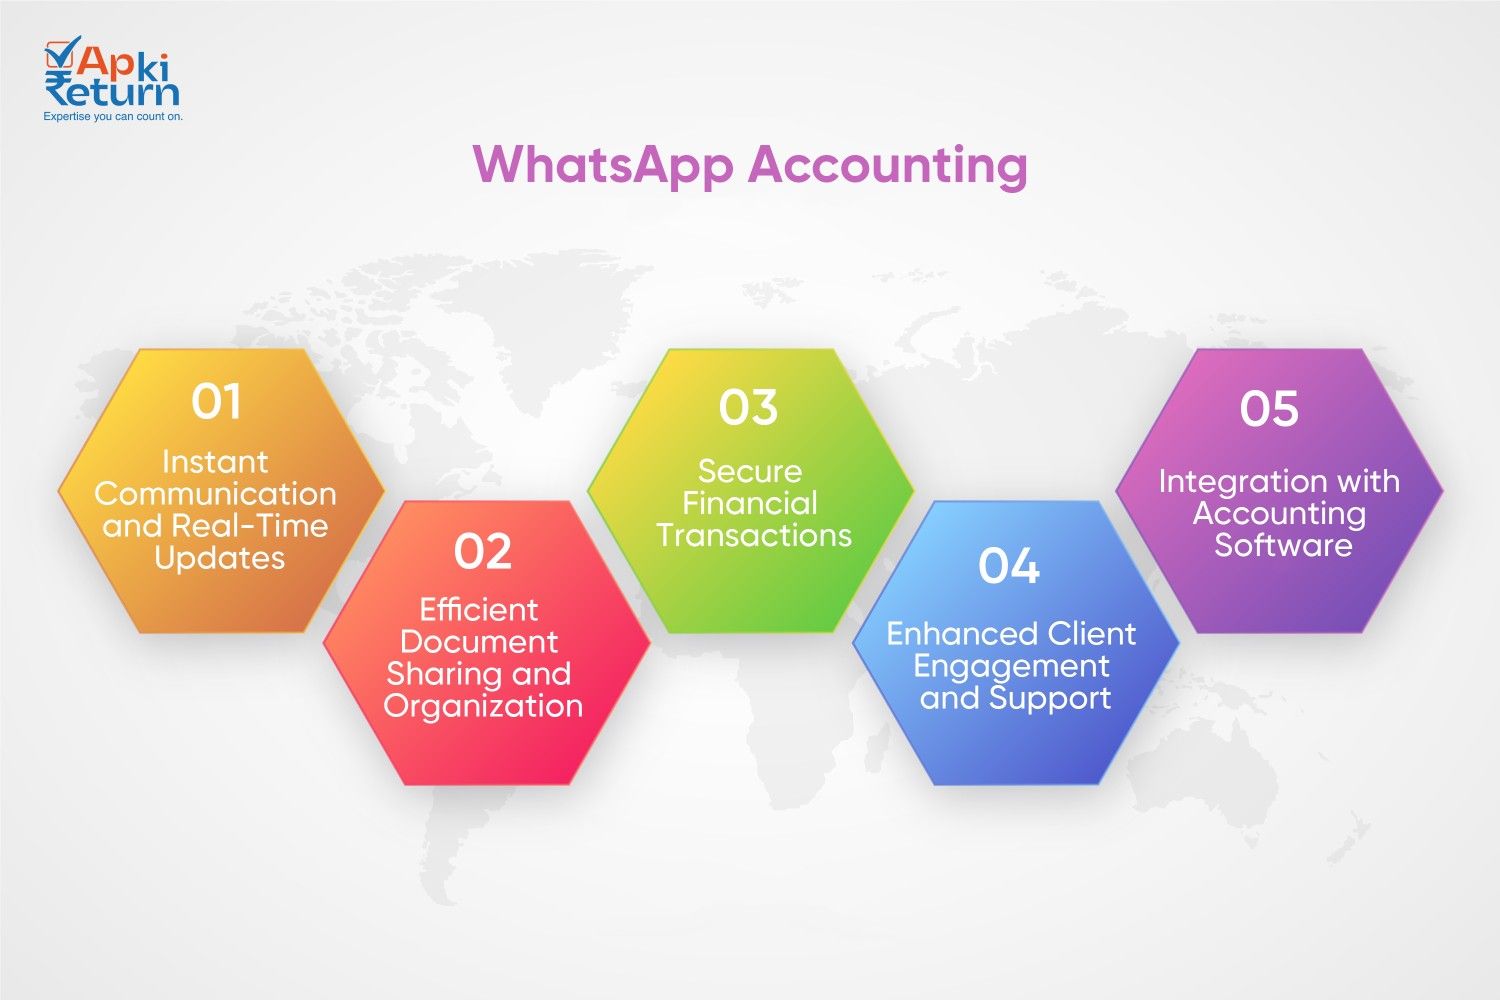 Advantages of WhatsApp Accounting